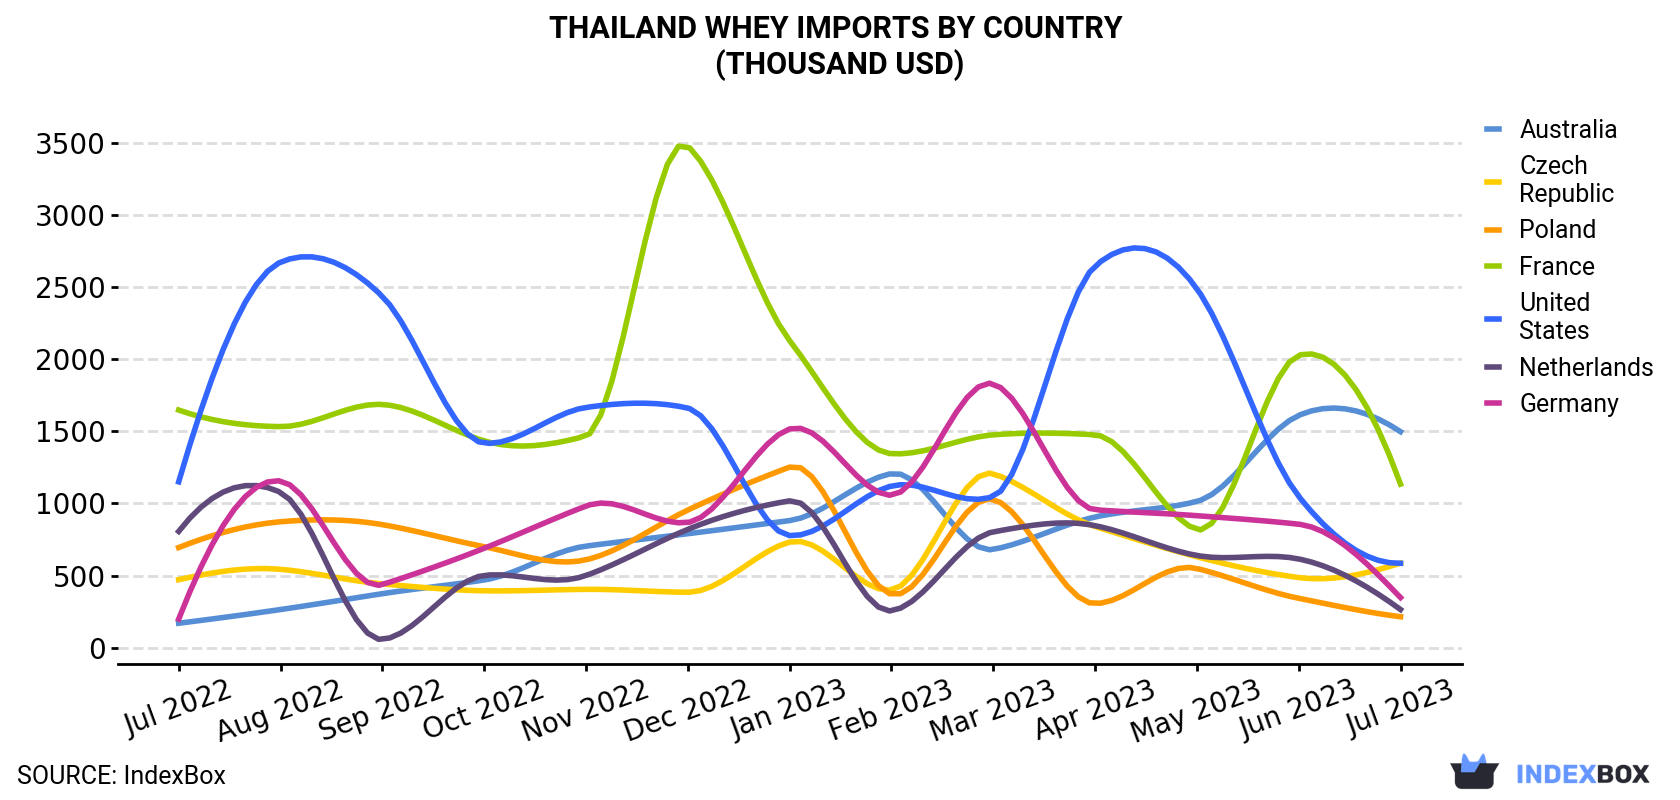 Thailand Whey Imports By Country (Thousand USD)